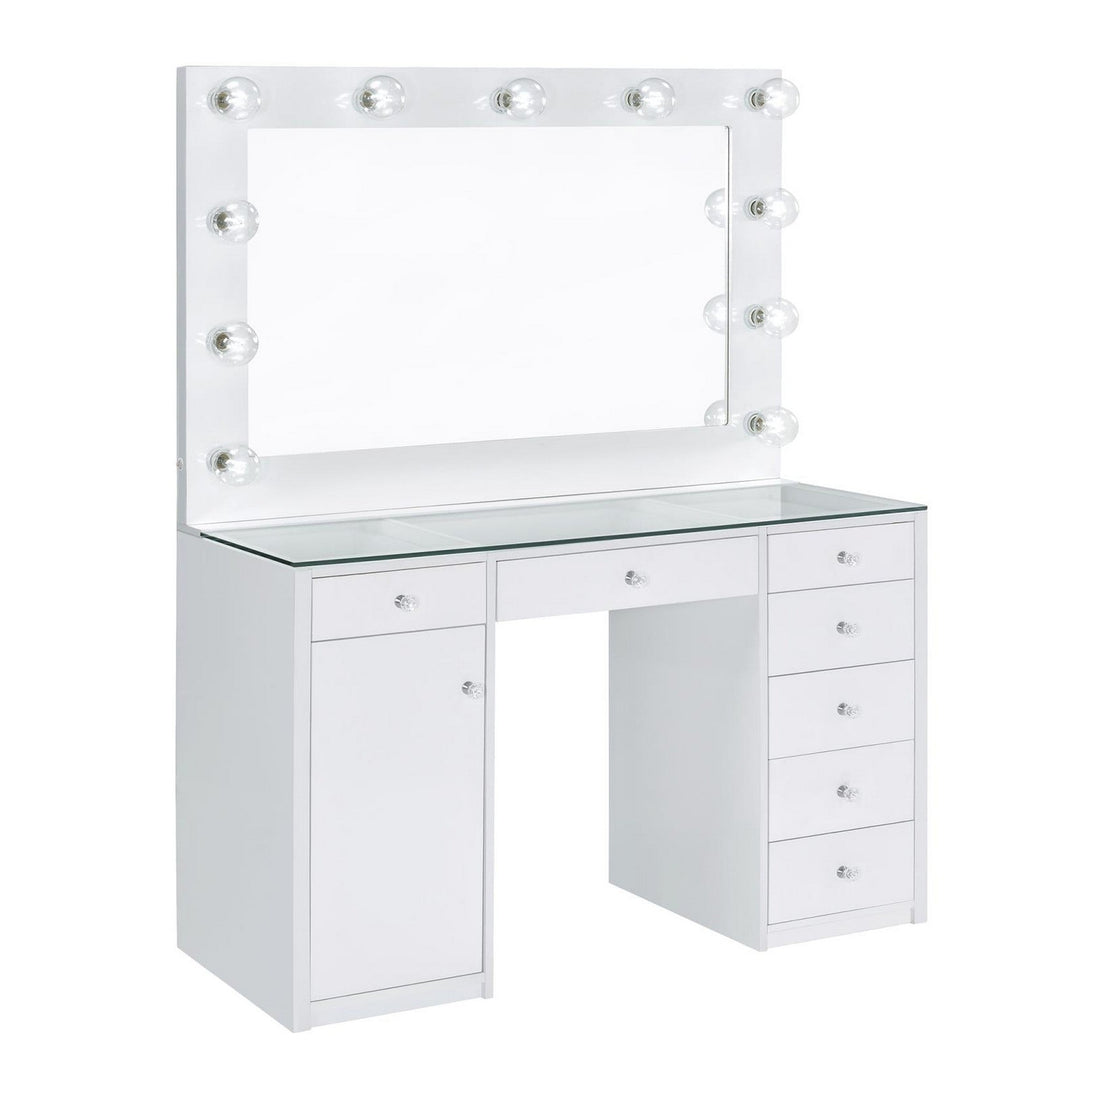 Percy 7-drawer Glass Top Vanity Desk with Lighting White 931143